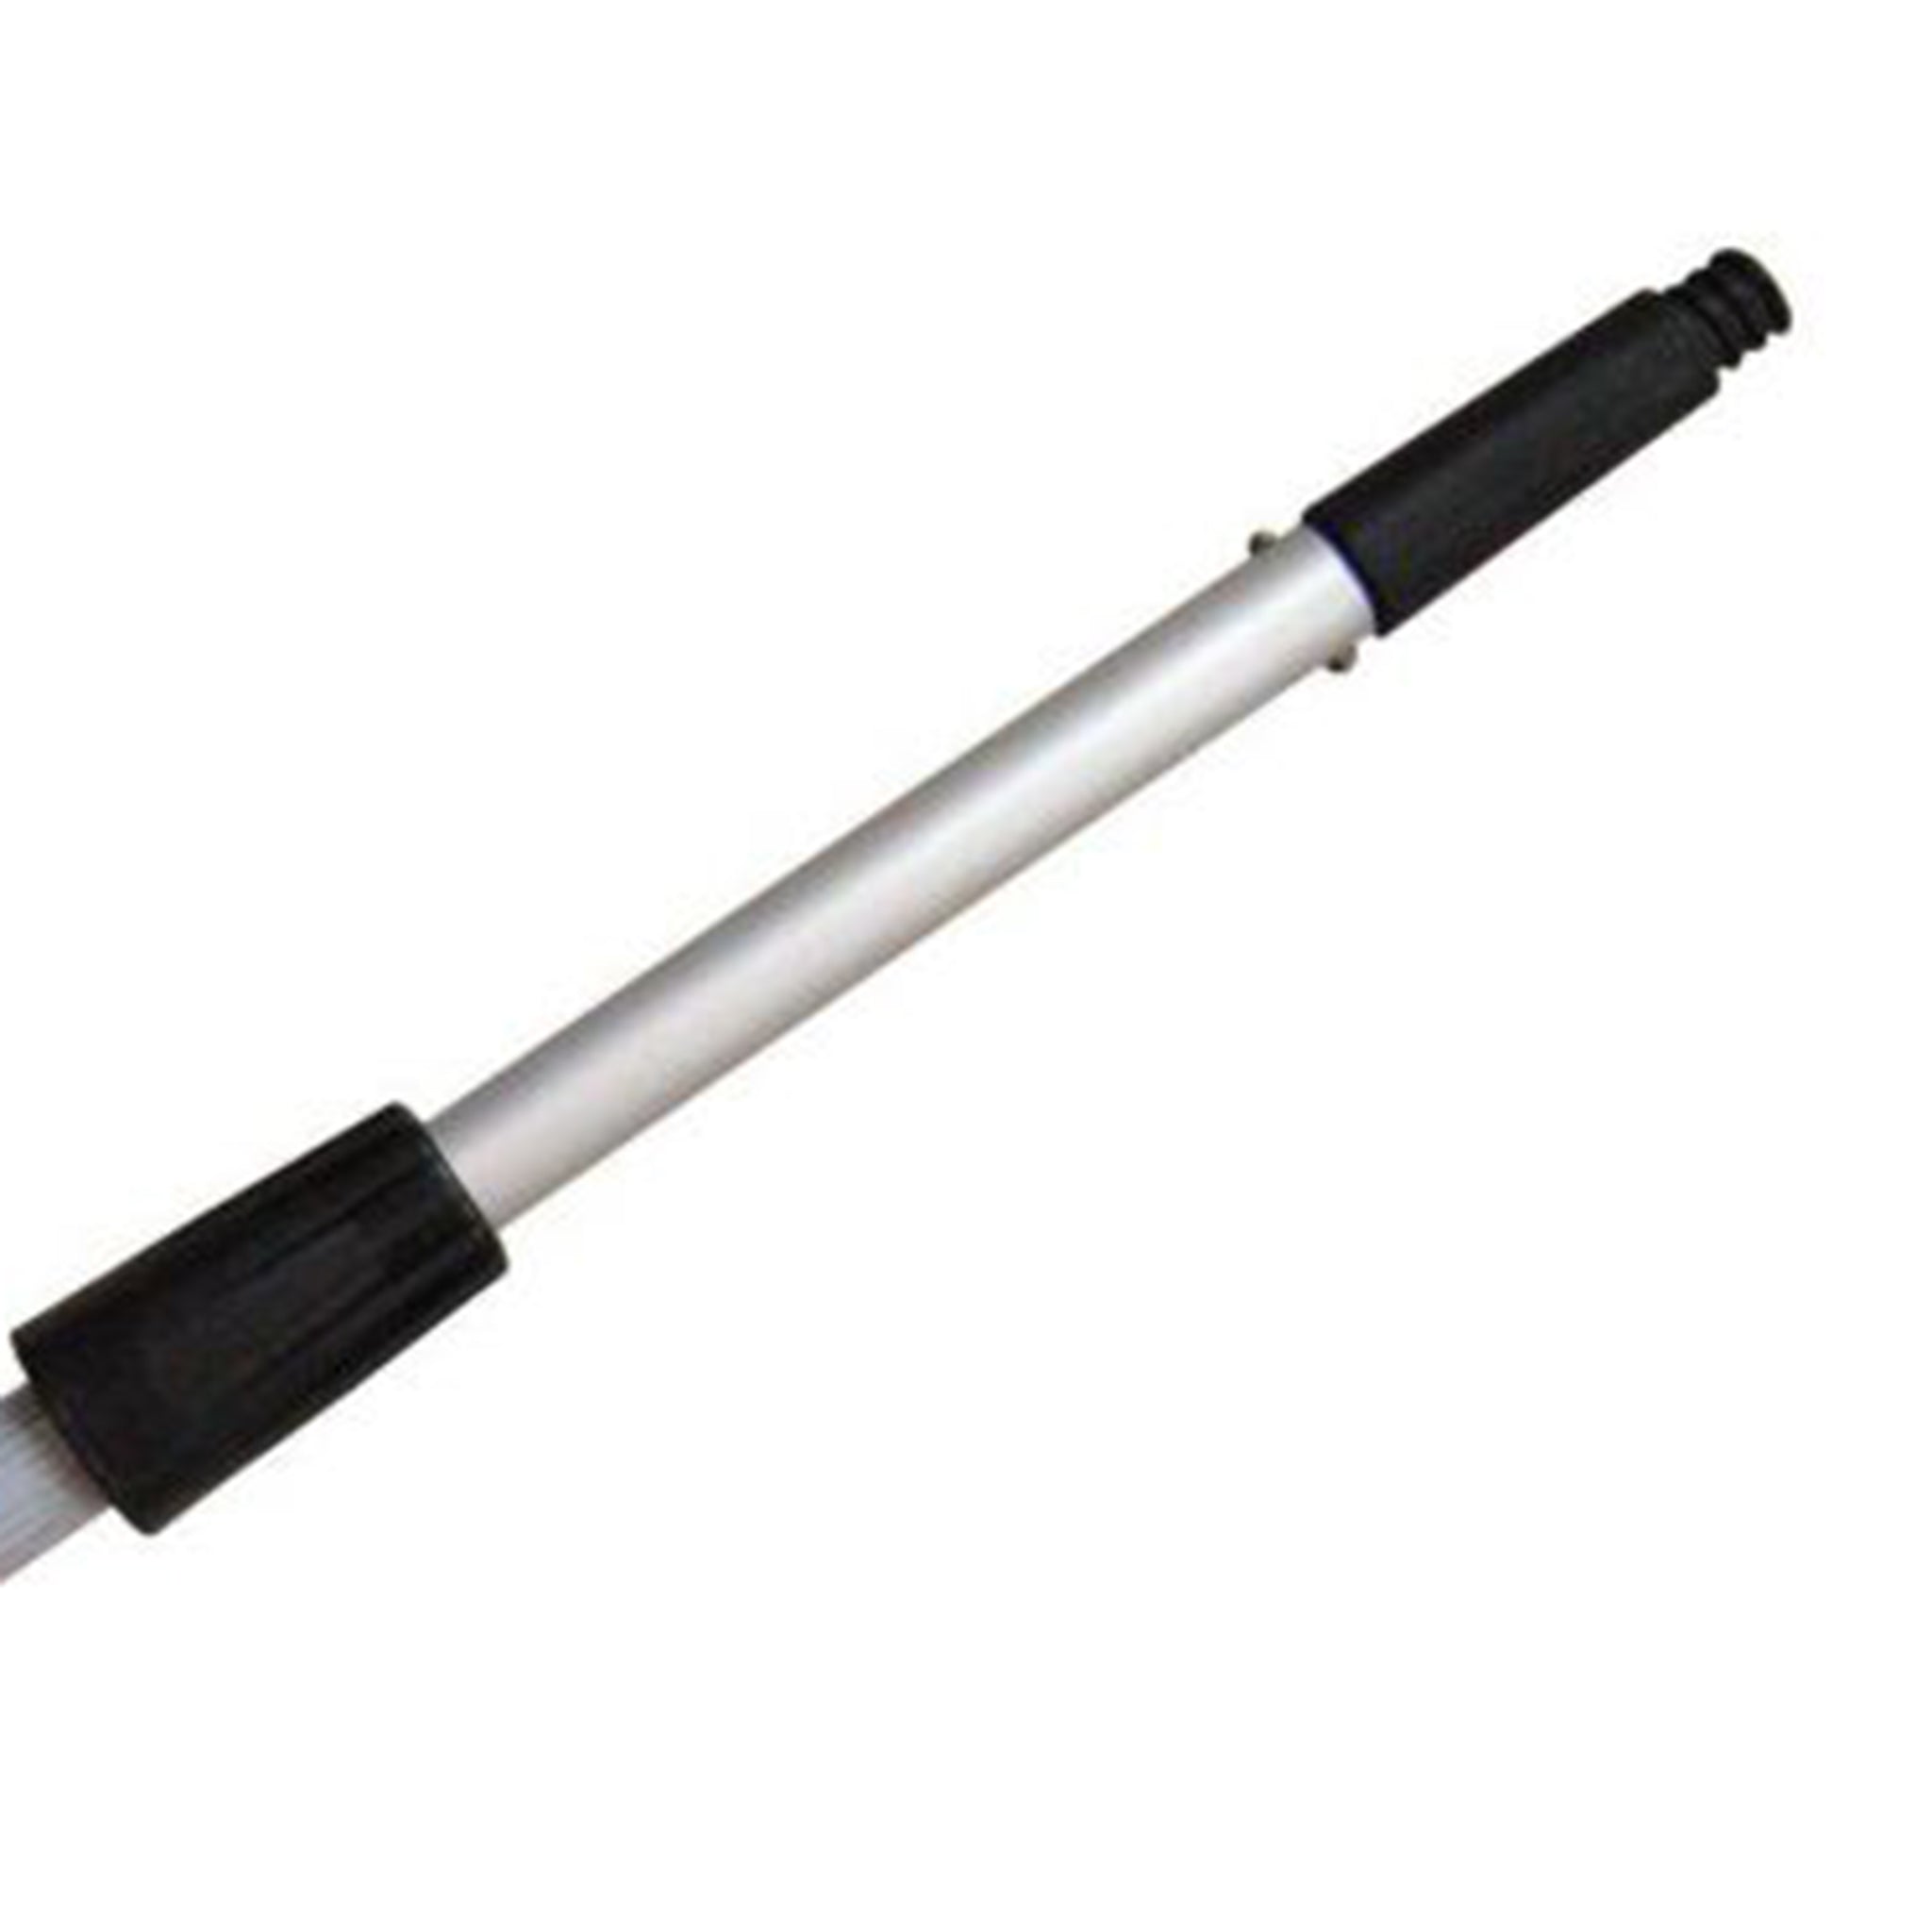 Window Telescopic Pole 12 ft  with 2 extensions